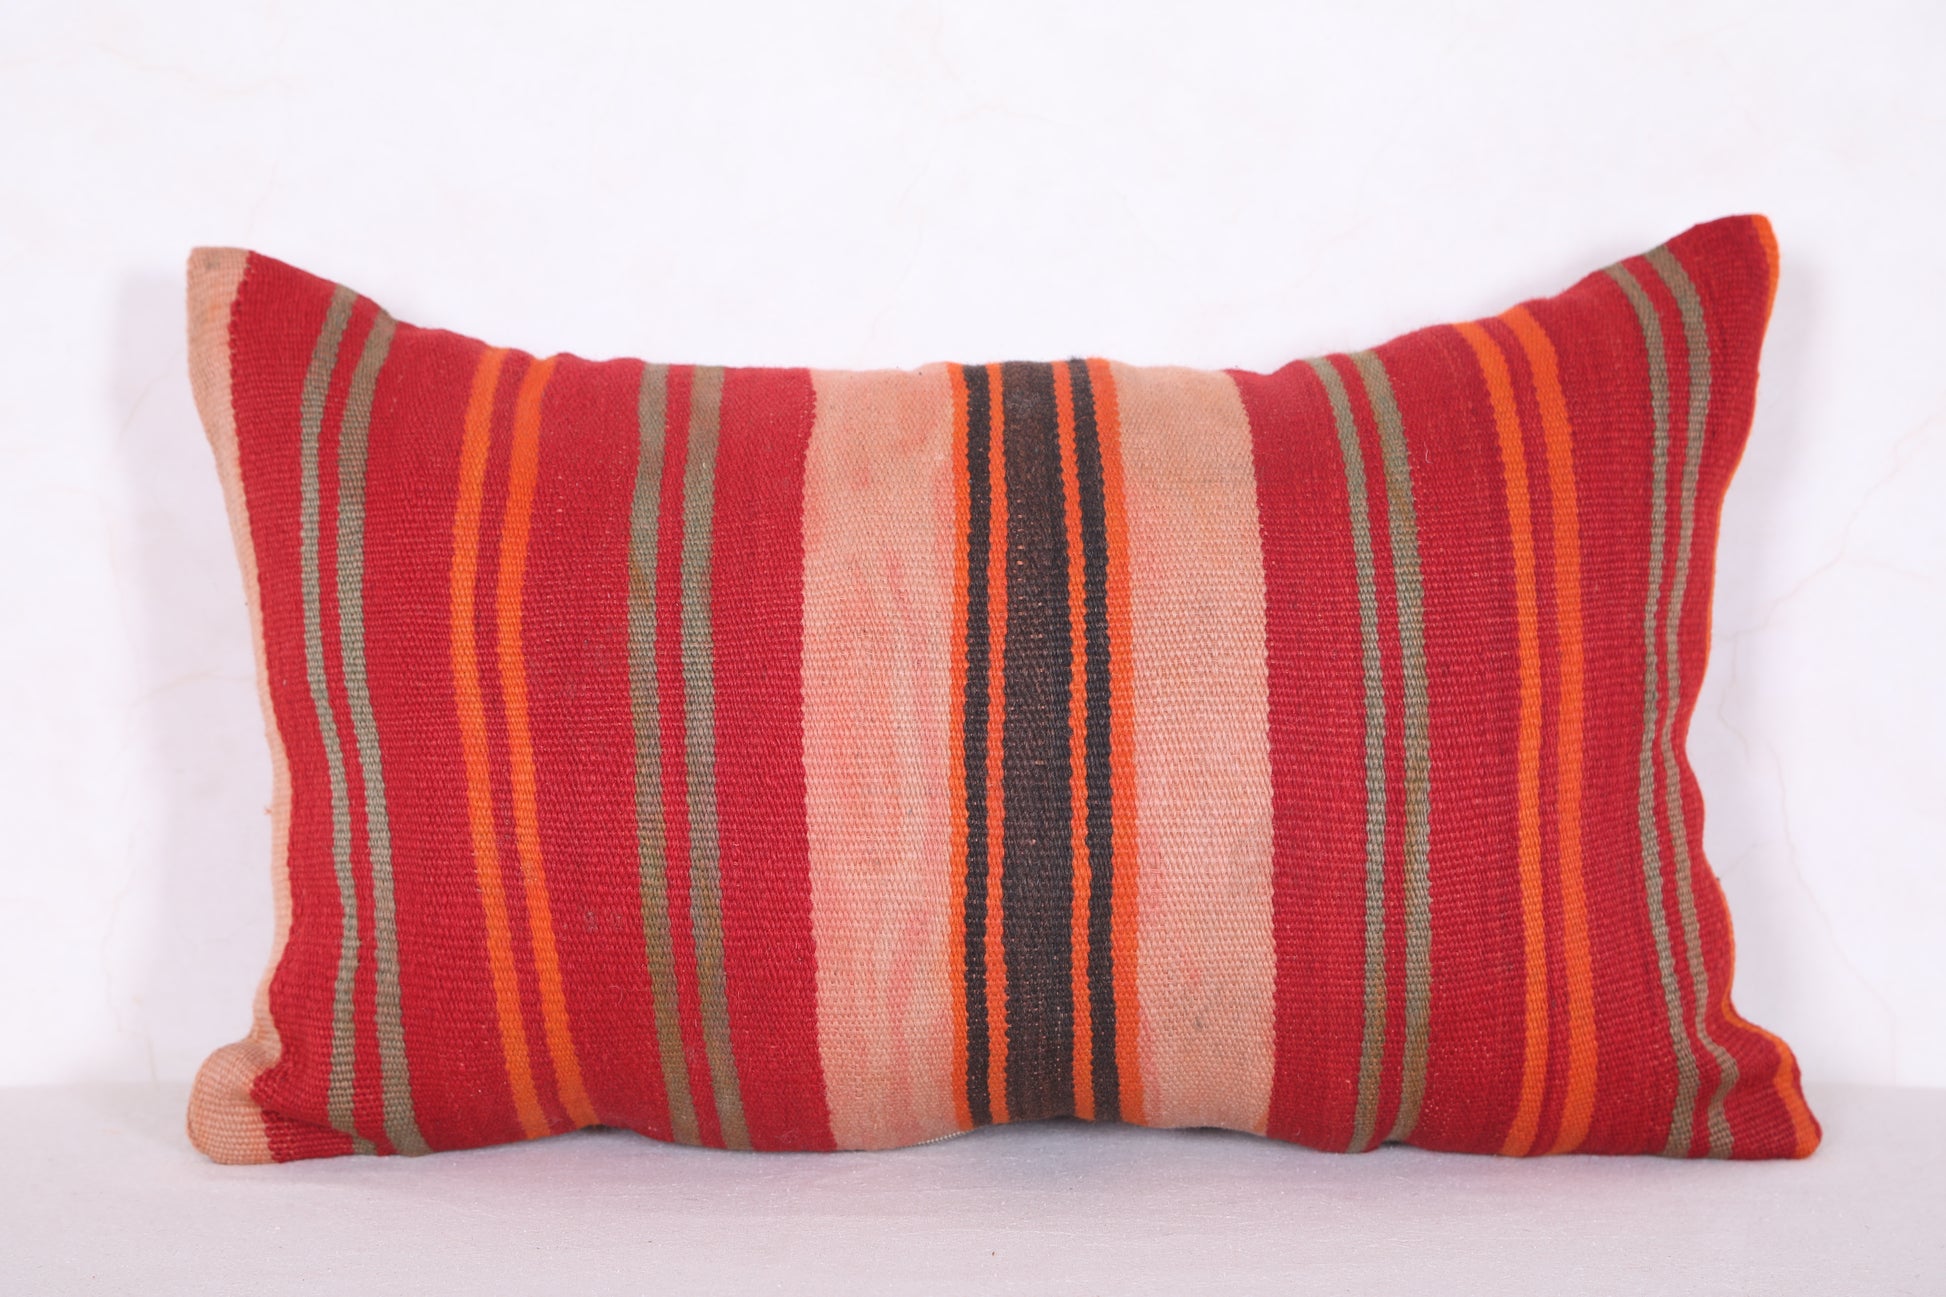 Long Moroccan Pillow 13.7 INCHES X 22.4 INCHES